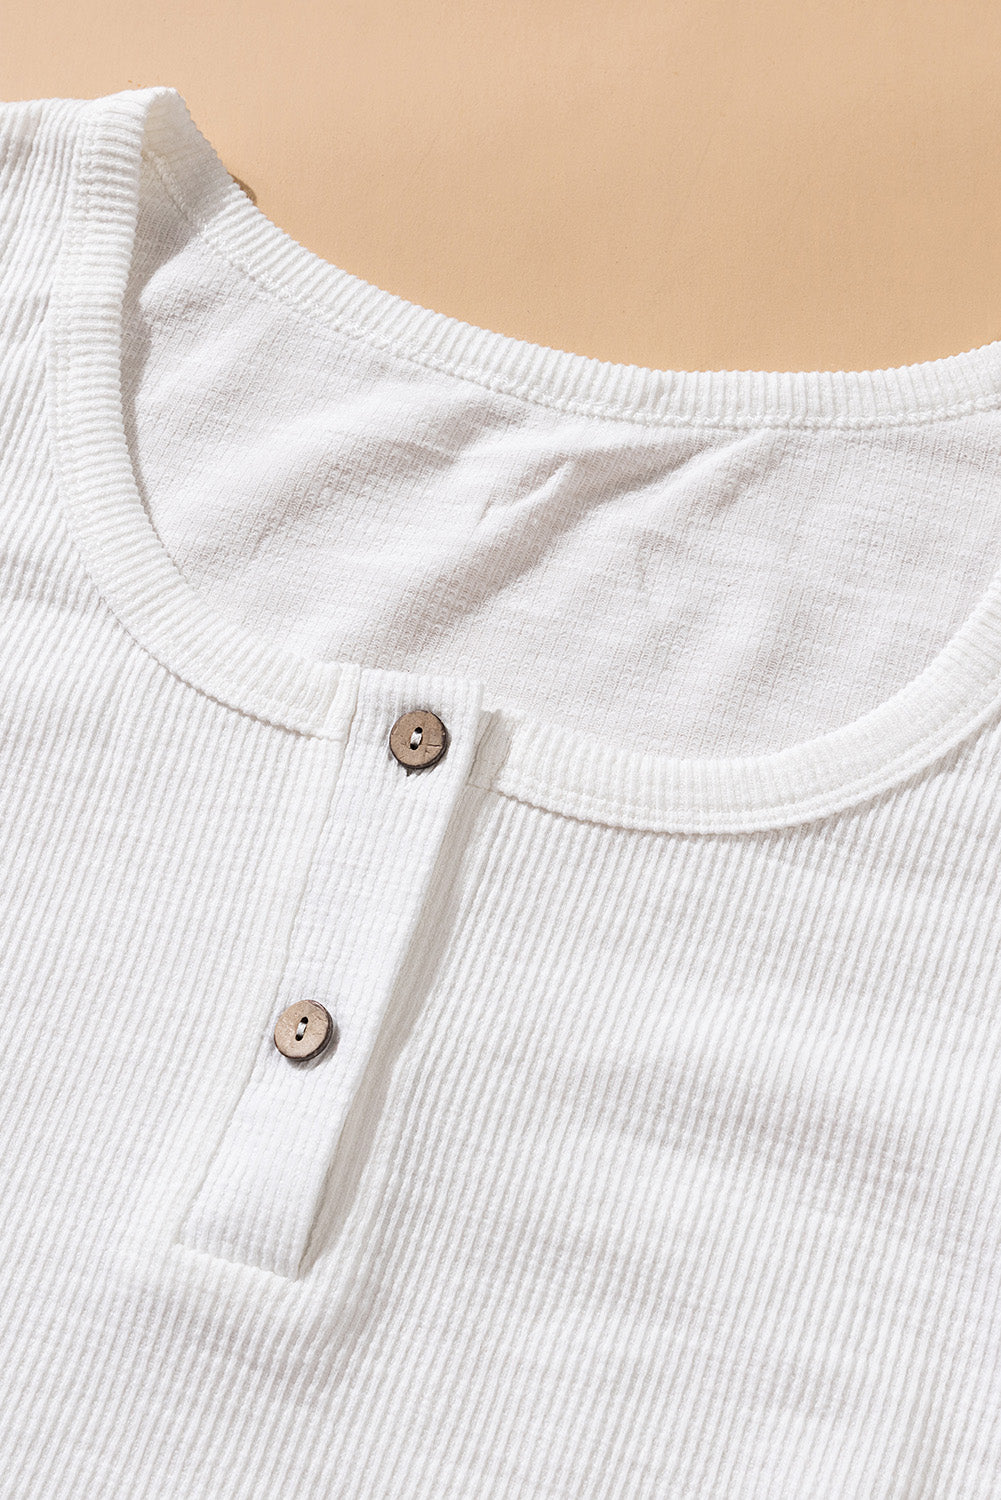 Casual White Crewneck Buttons Ribbed Knit Long Sleeve Top